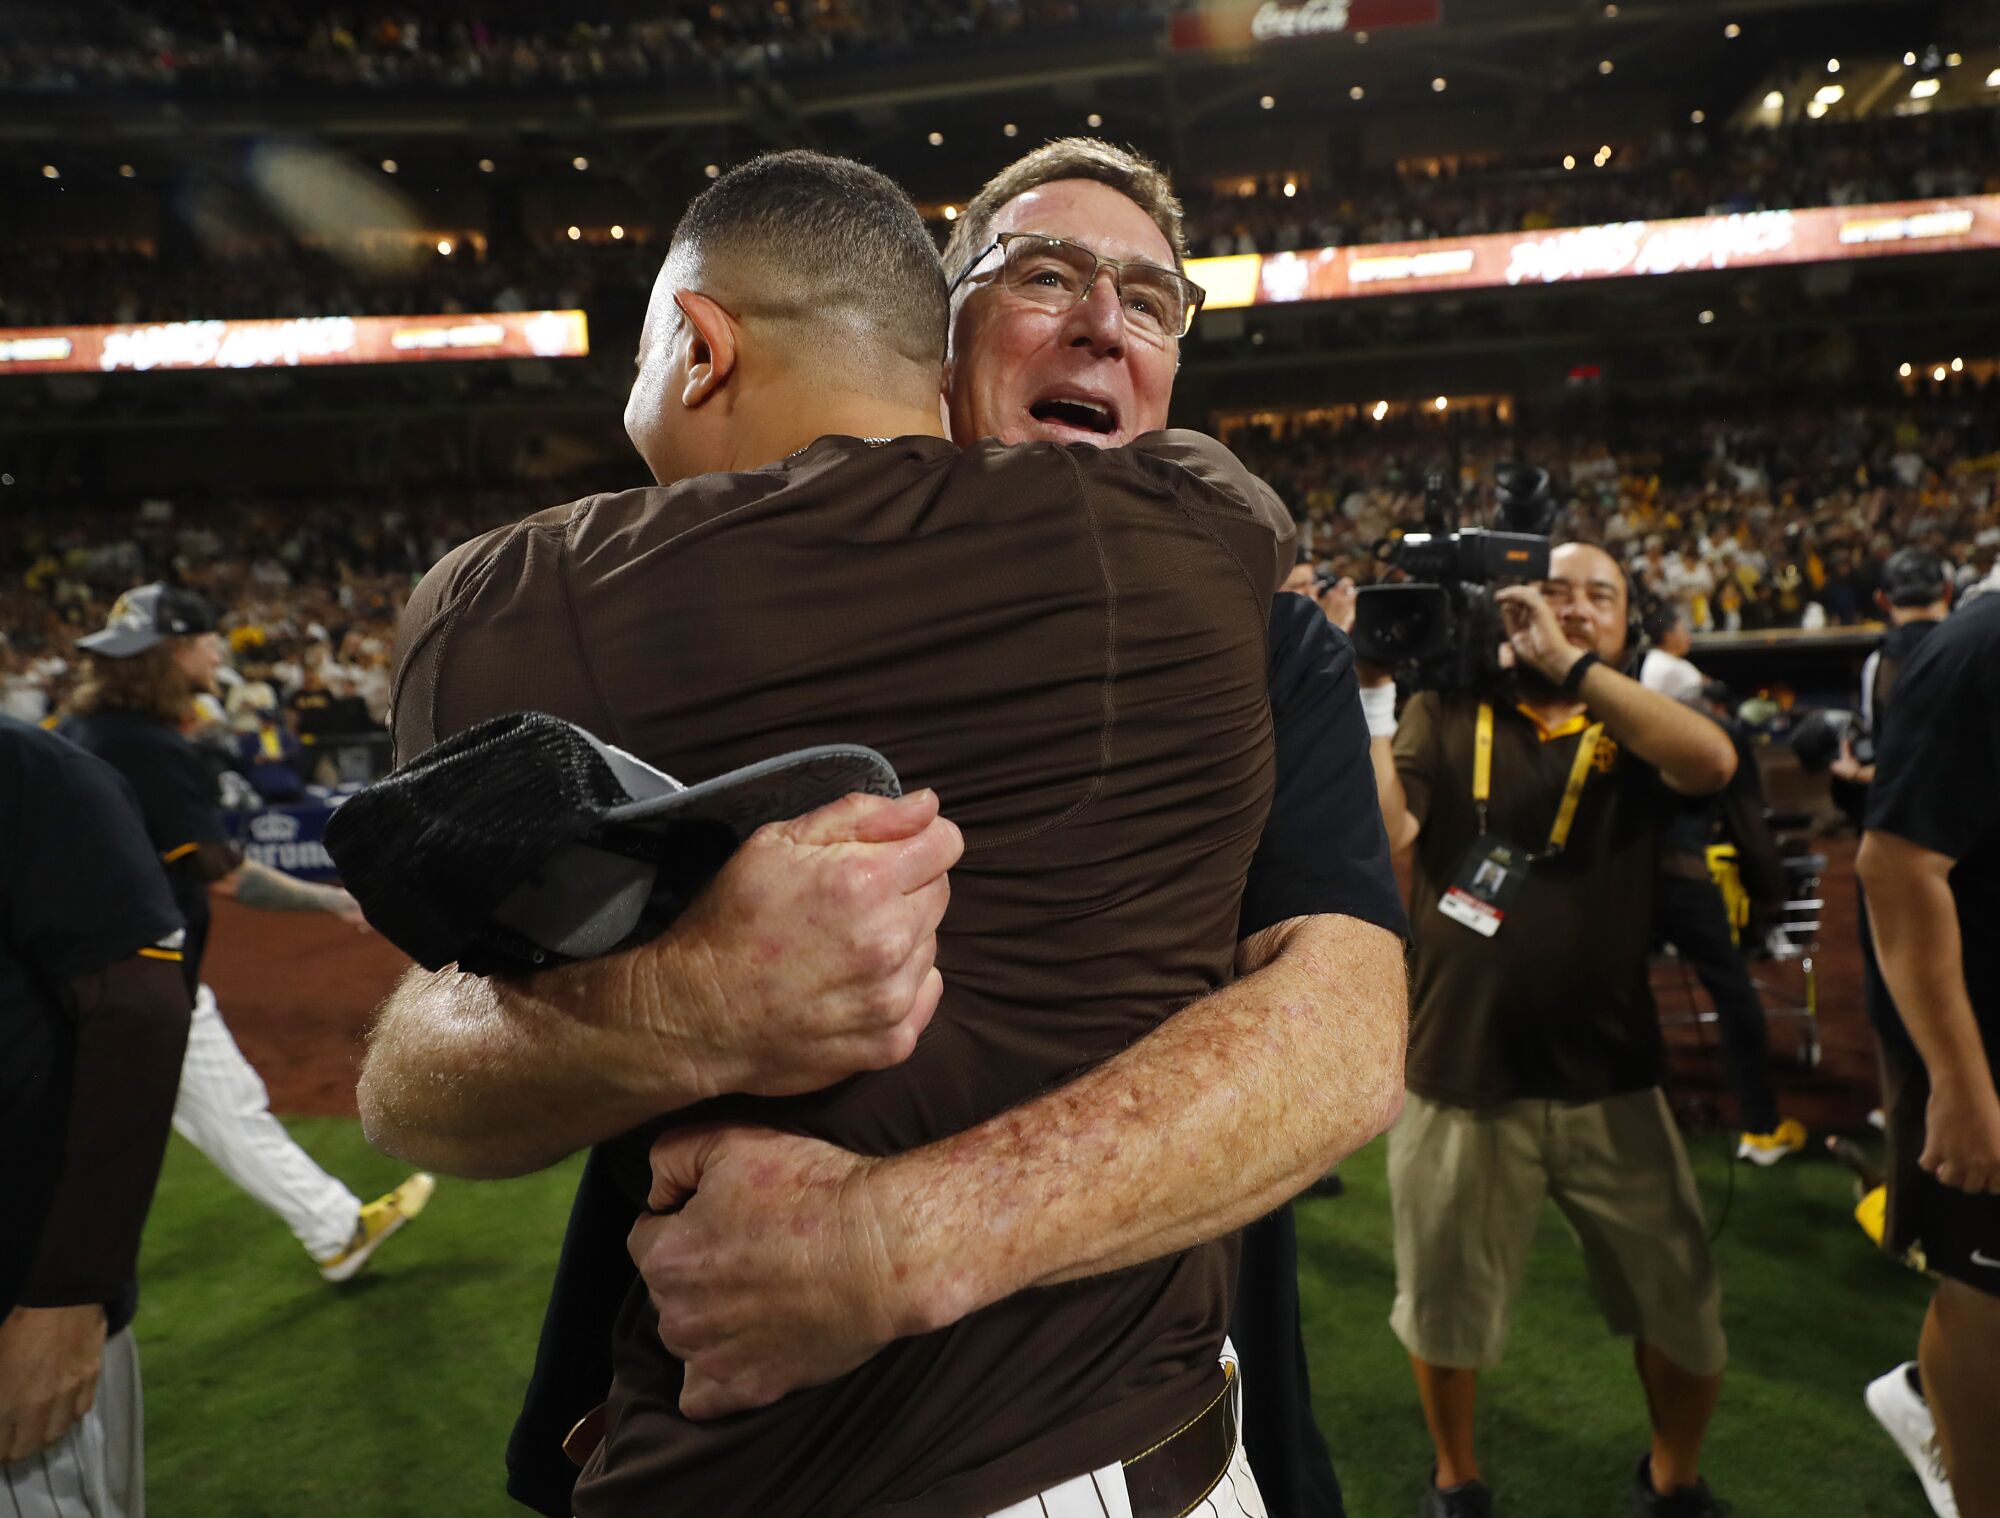 San Diego Padres manager Bob Melvin and Manny Machado celebrate after winning the NLDS